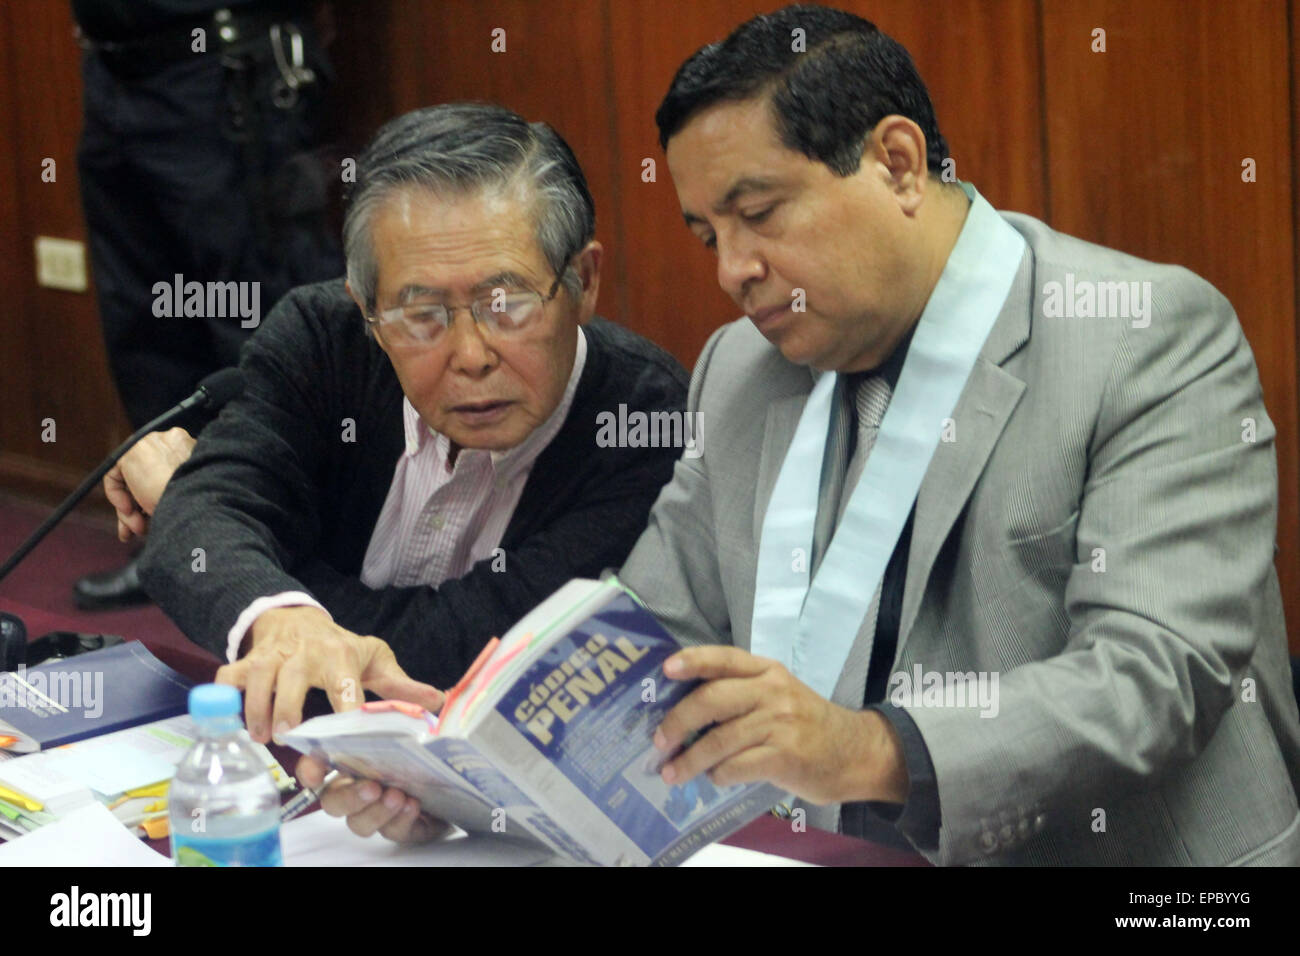 Lima, Peru. 15th May, 2015. Peru's former President Alberto Fujimori (L) and his lawyer William Paco Castillo (R) read the Penal Code during his hearing in Lima's Supreme Court of Justice in Lima city, capital of Peru, on May 15, 2015. Former Peruvian President Alberto Fujimori presented on Friday an 'Habeas Corpus' for the replacement of the telephone line in his detention center, which was suspended after he granted interviews to the media, according to local press. © Luis Camacho/Xinhua/Alamy Live News Stock Photo